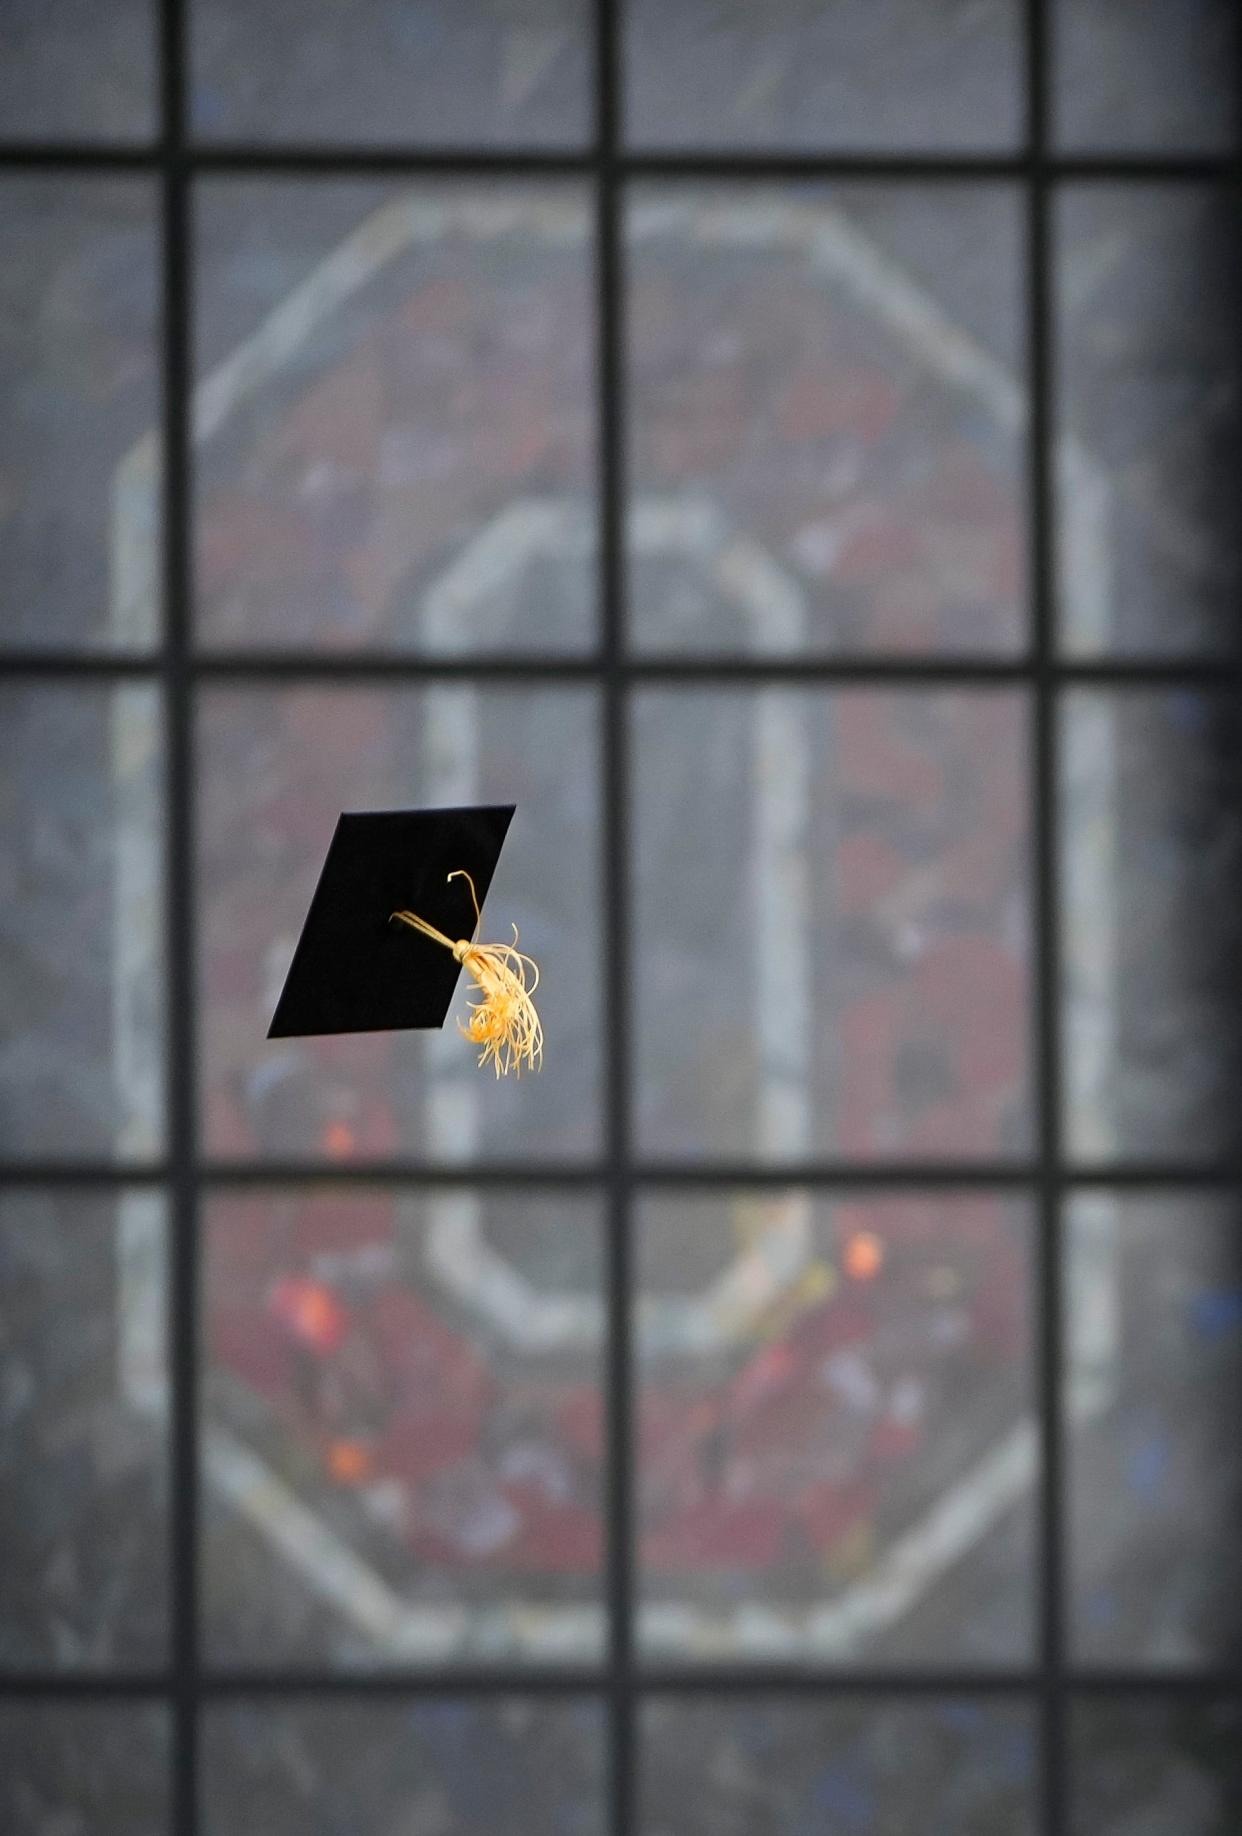 A soon-to-be graduate tosses their cap in the air while taking photos under the Ohio Stadium rotunda in their graduation regalia on May 4, 2022. Ohio State's spring commencement is inside the stadium on Sunday, May 8.